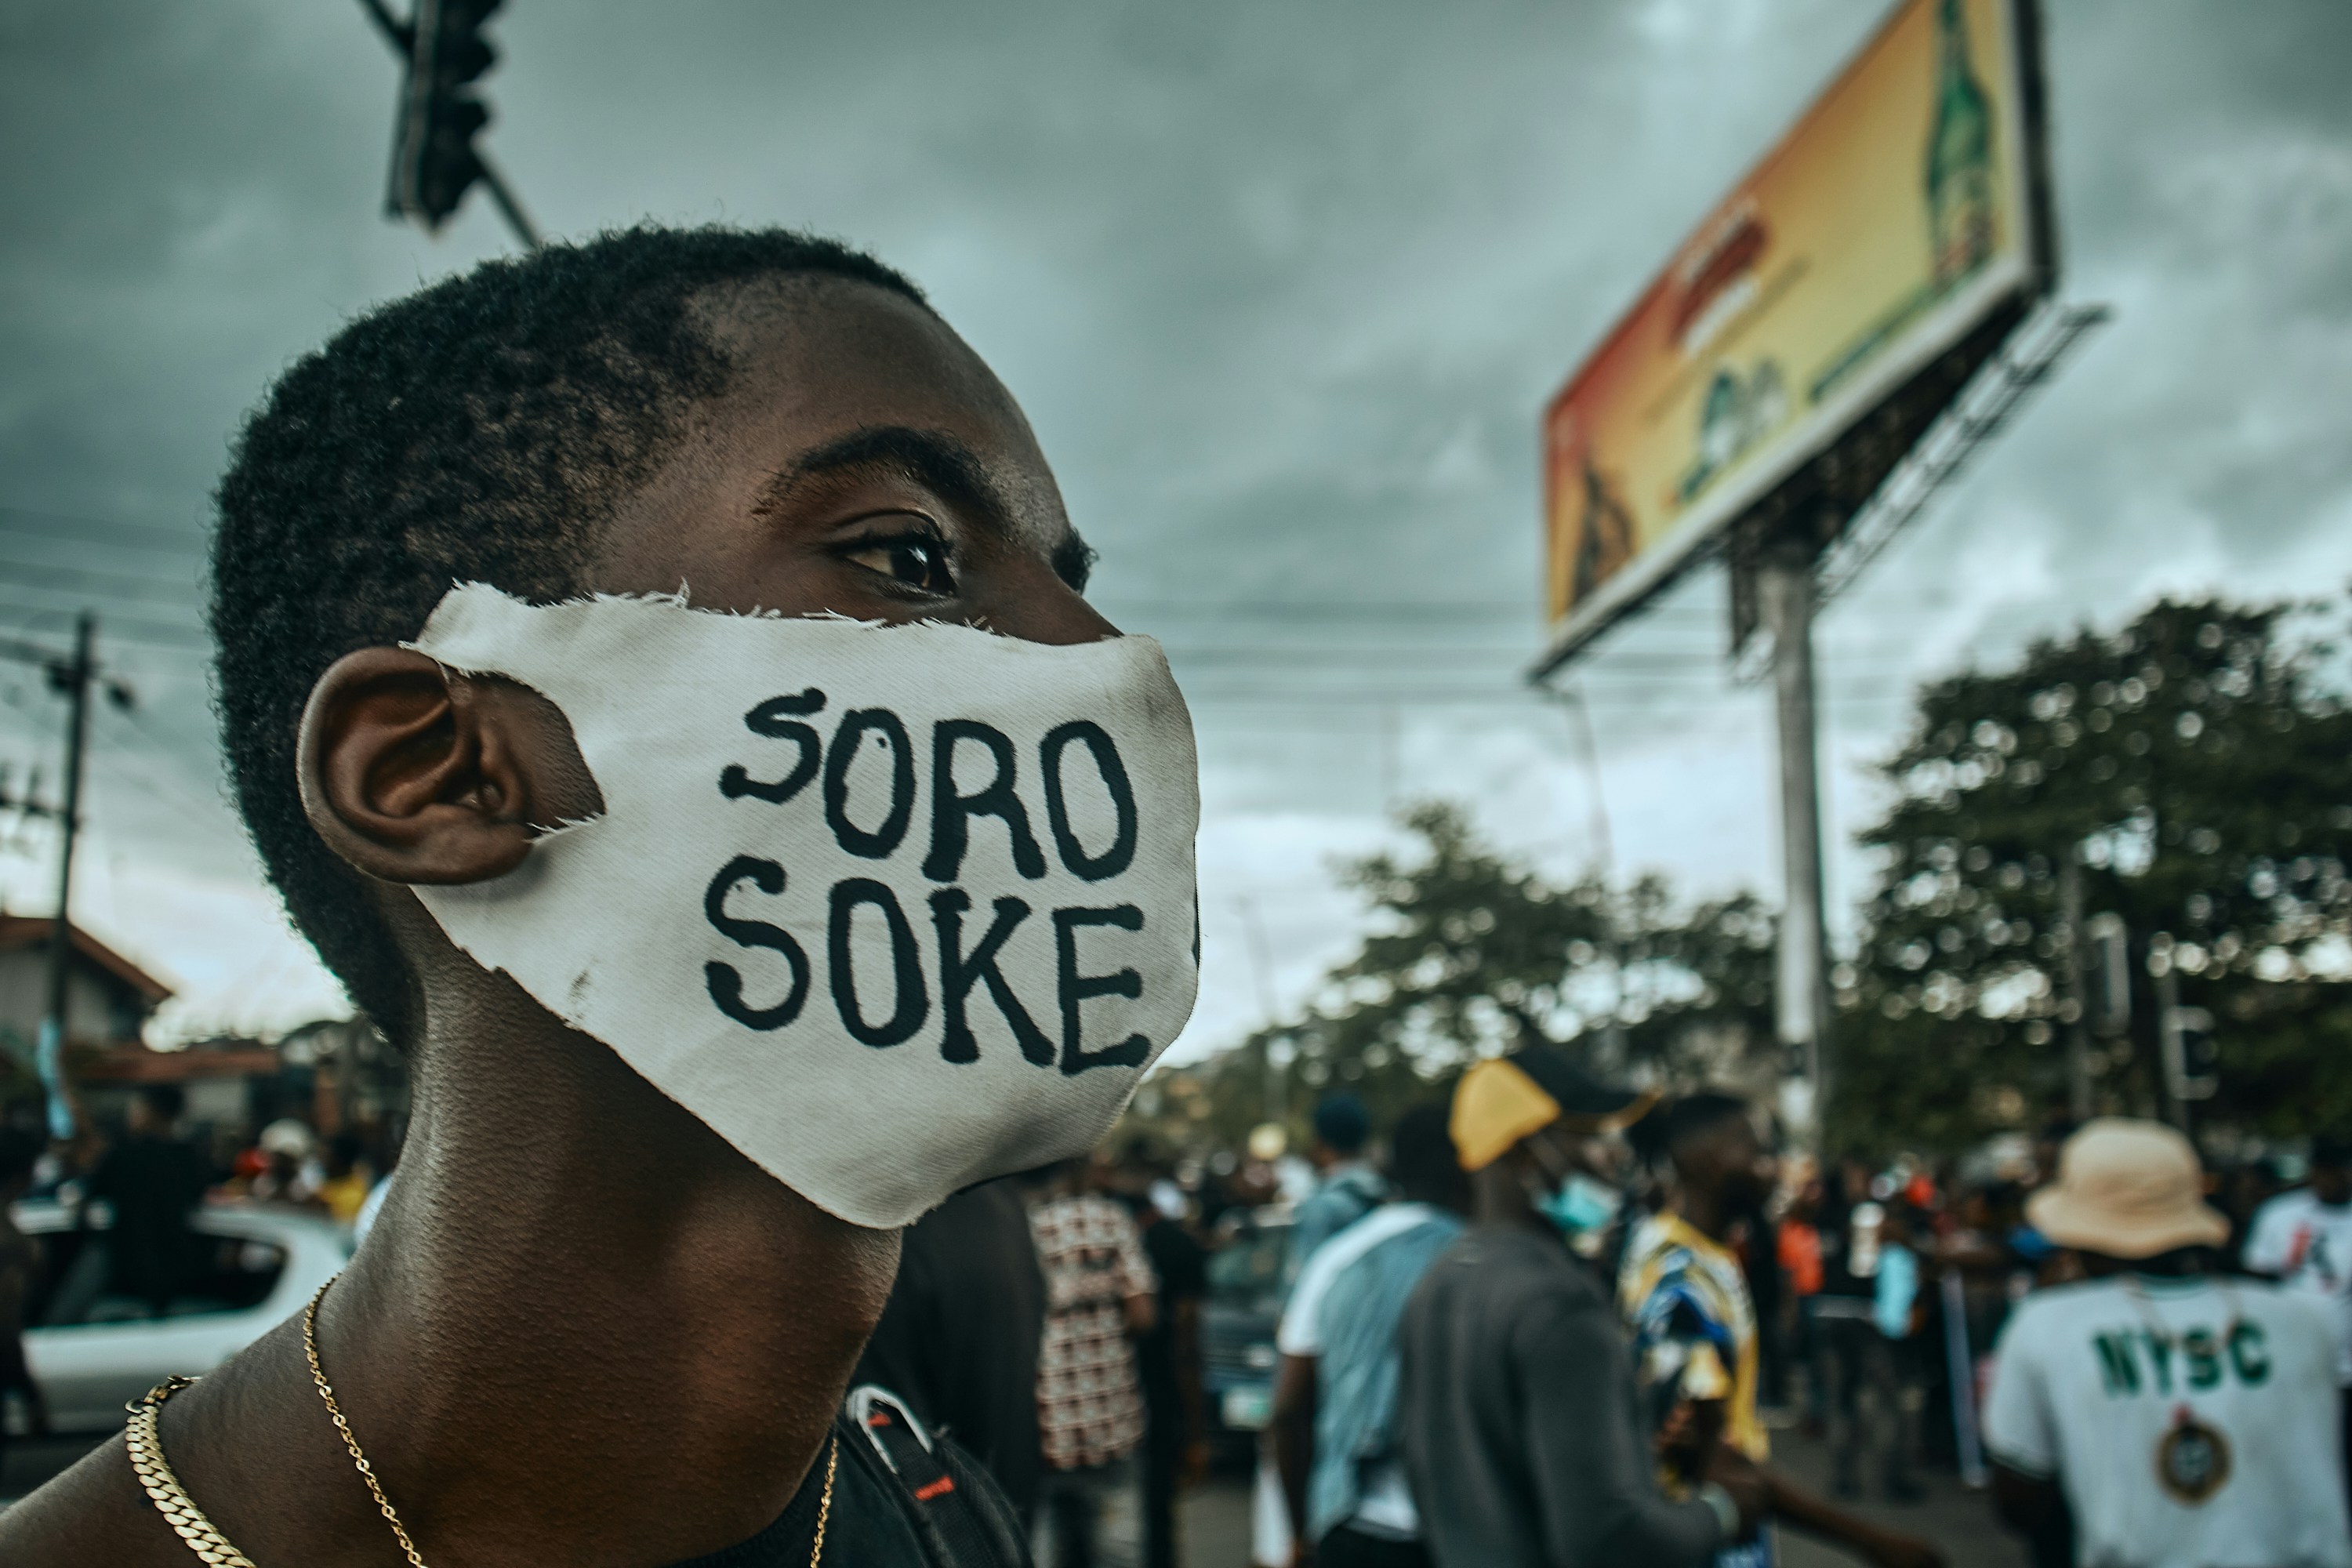 Port Harcourt, Nigeria - October 20, 2020: An #endsars End Sars protester's side view showing a word written on the mask he is wearing. Soro Soke is a Yoruba word that means “Speak Up!” It was very popular during the protest.